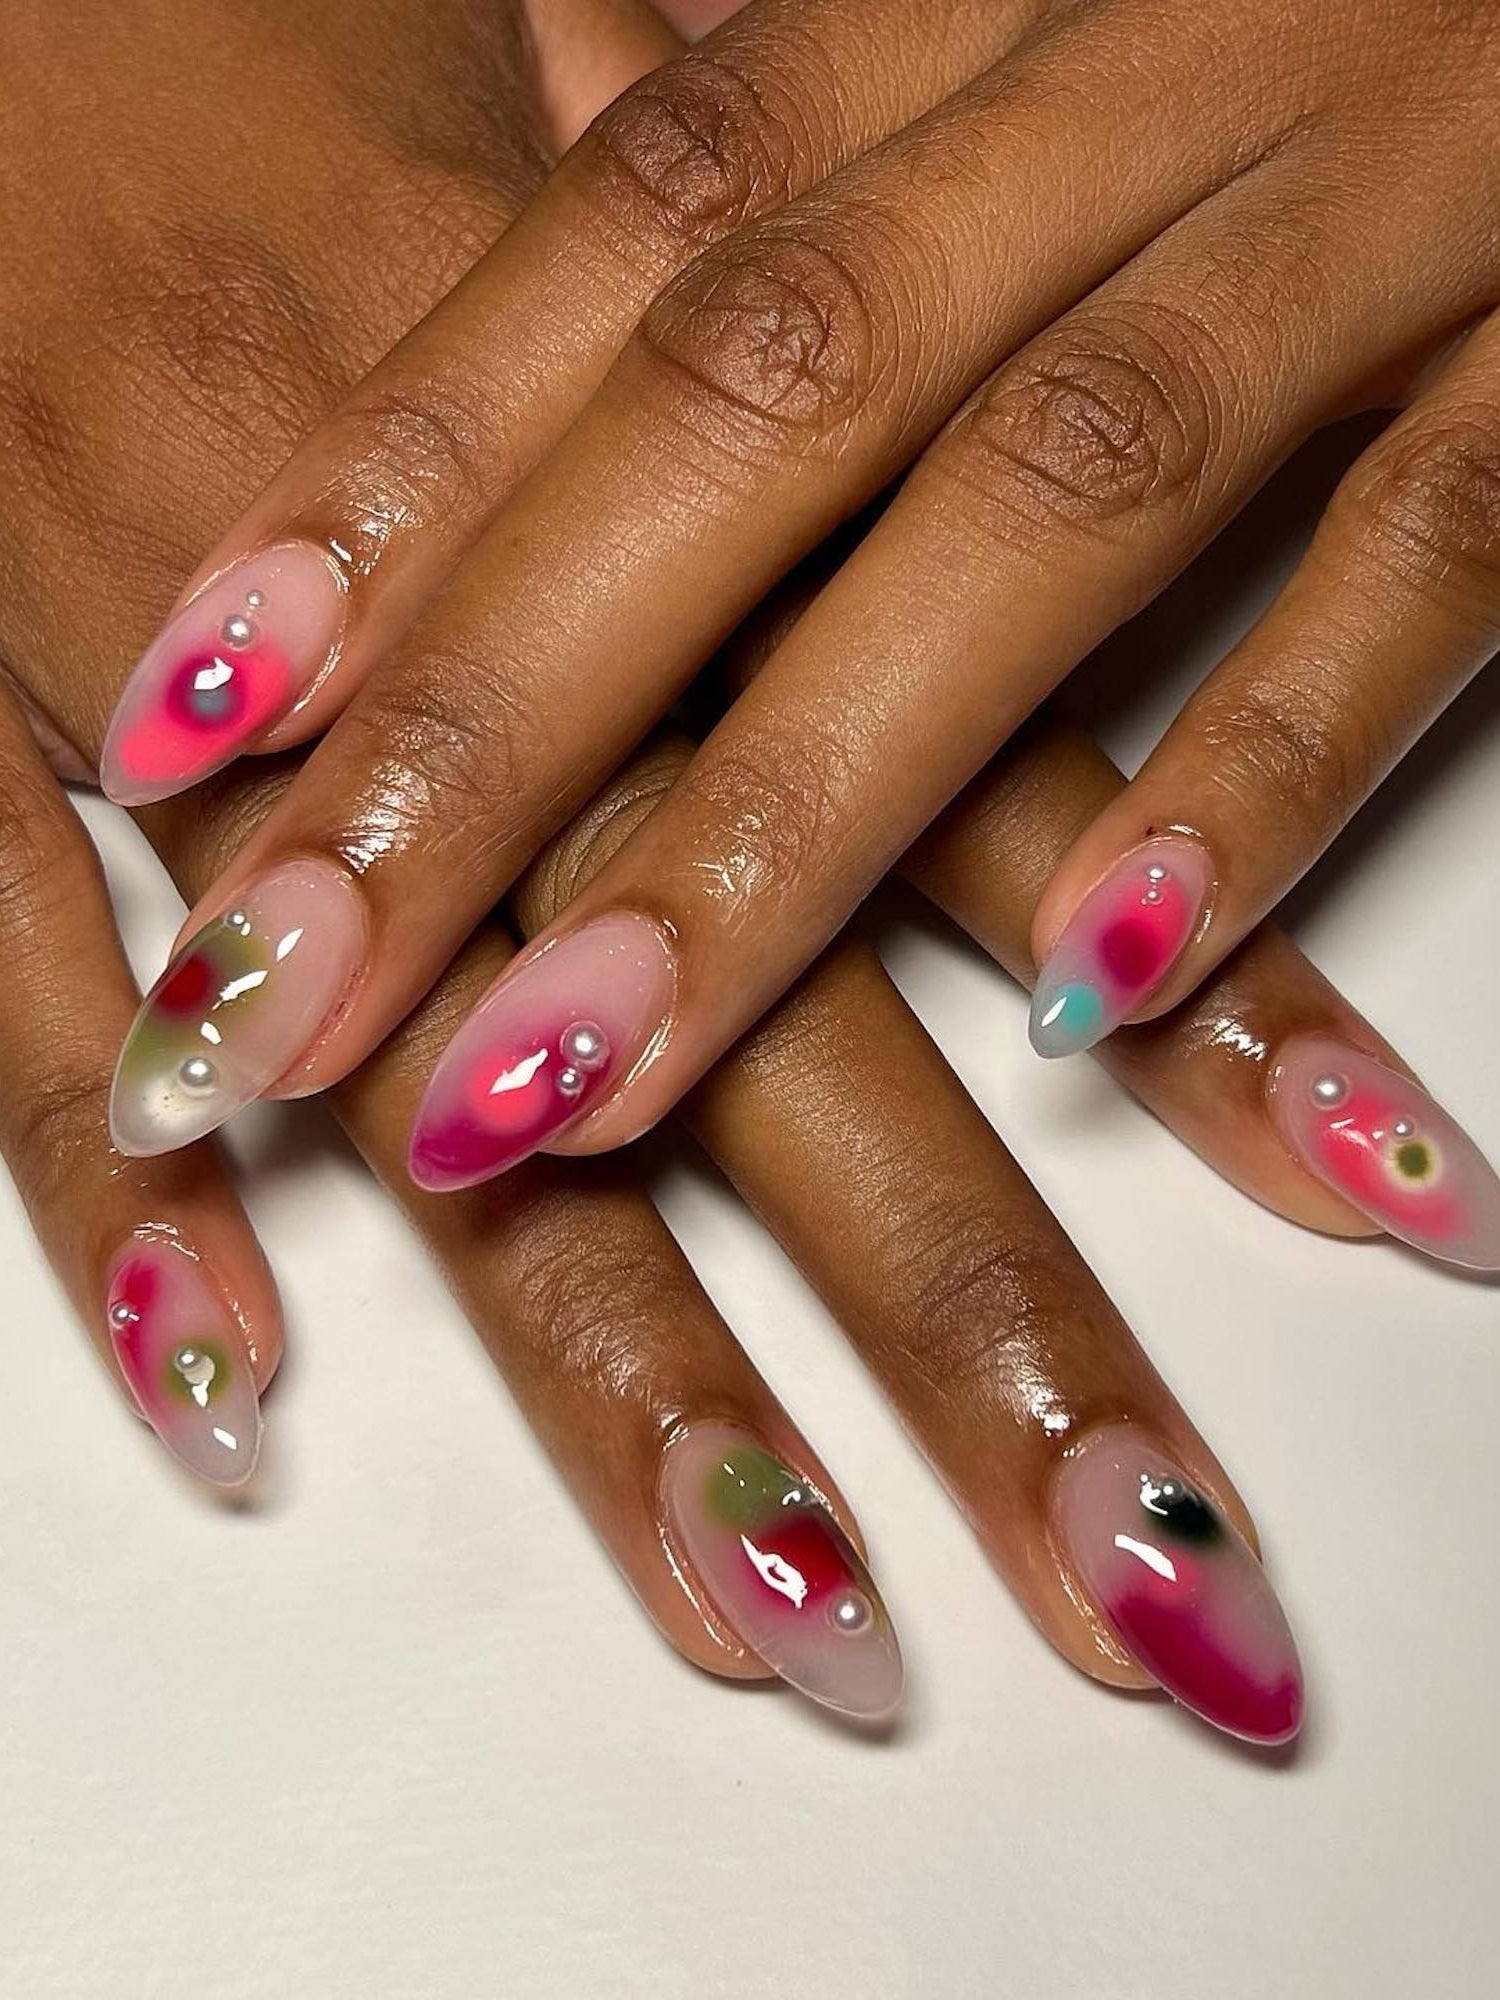 Pop-Up Nails and Spa - 💖Our dearest customers, ✨At Pop-up nails and spa  you will receive the finest nail care and beauty services in an inviting  and comfortable atmosphere. 🎁 We strive